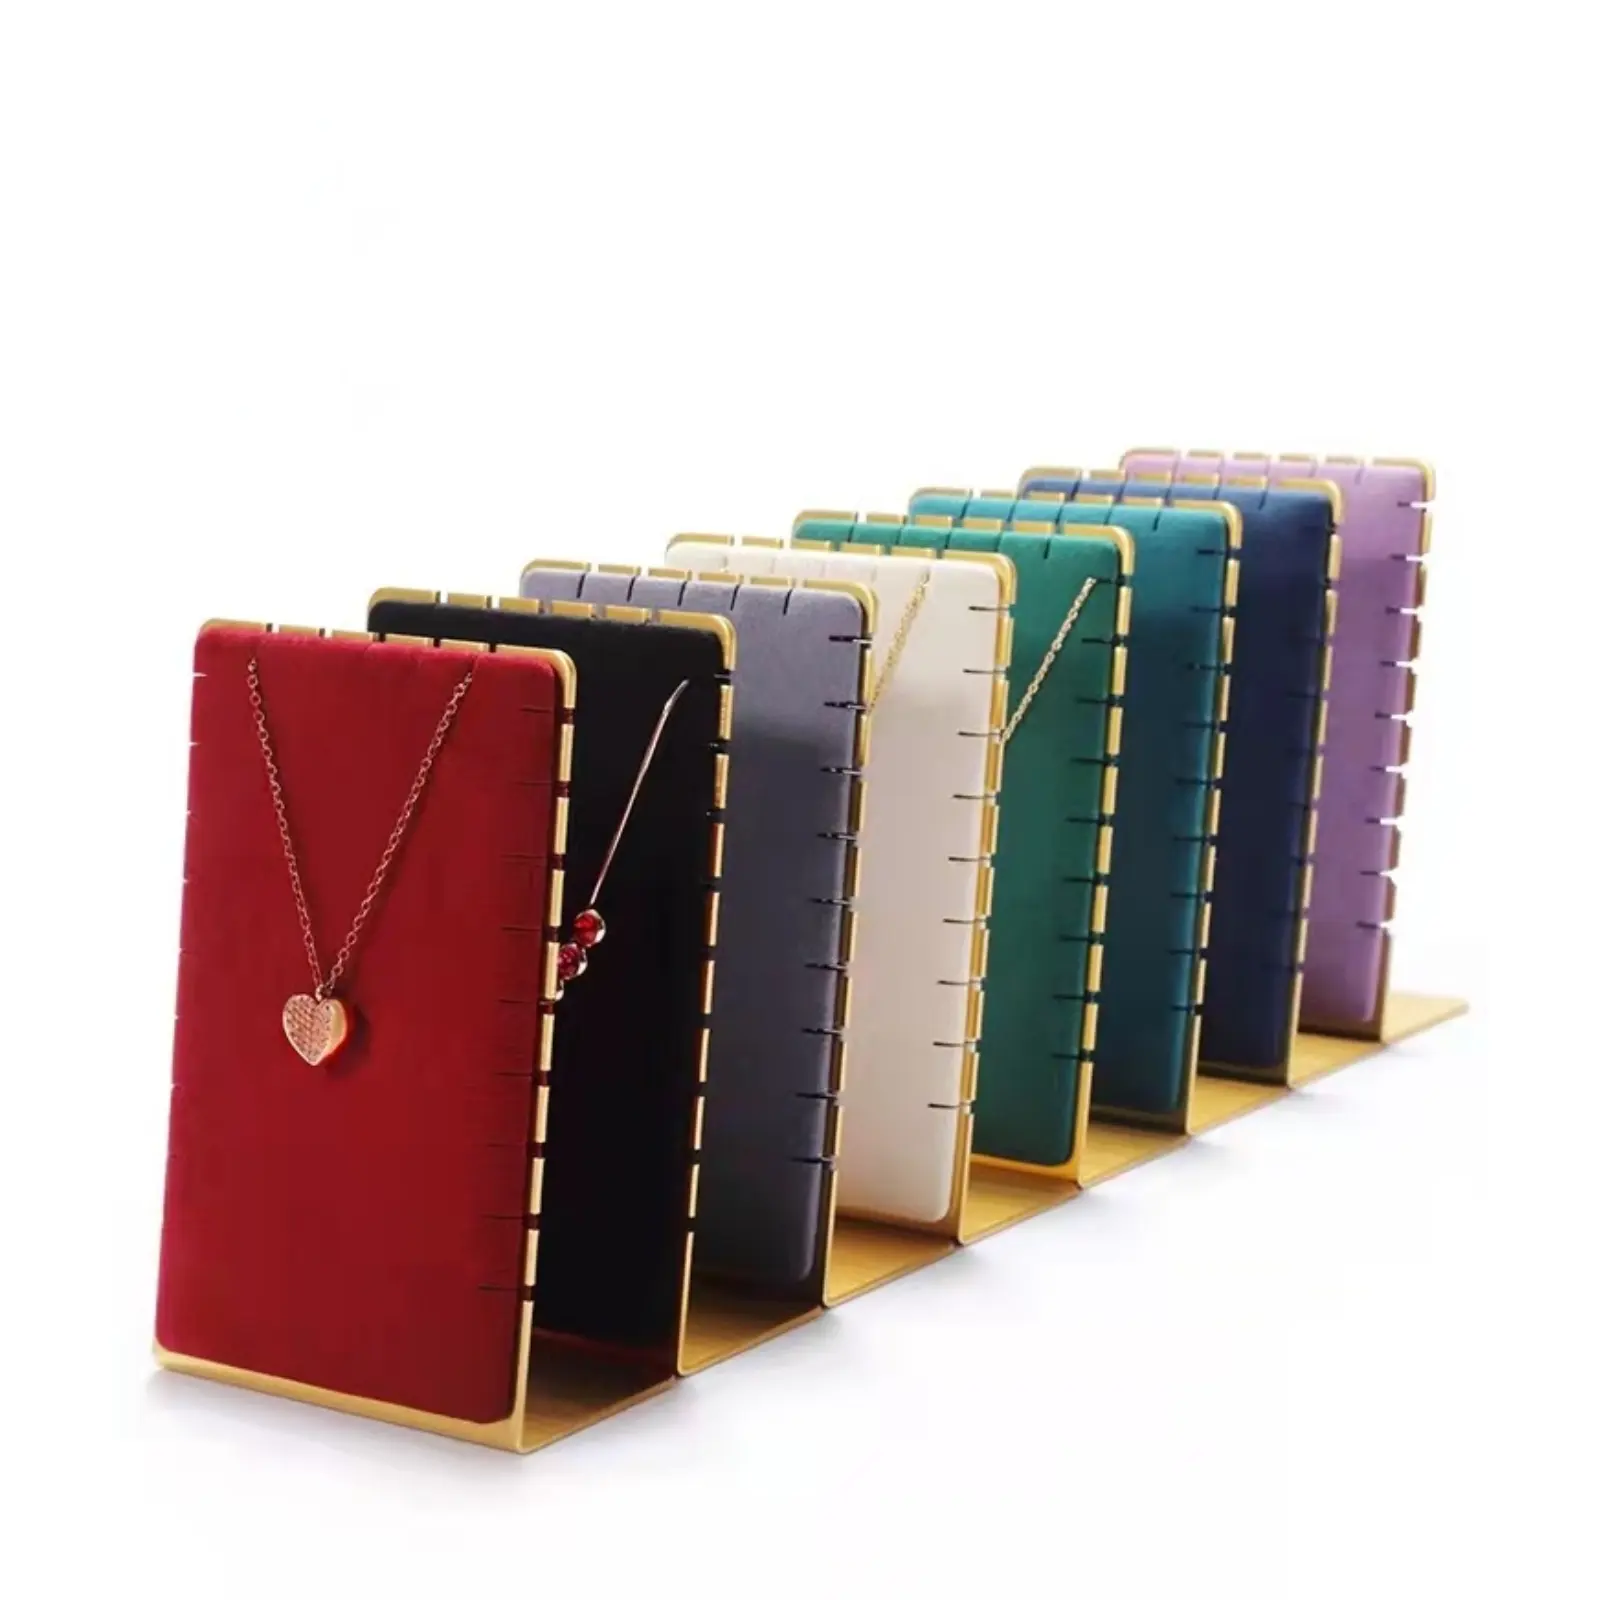 Wholesale necklace holder jewelry store fixtures retail display metal stand in stock